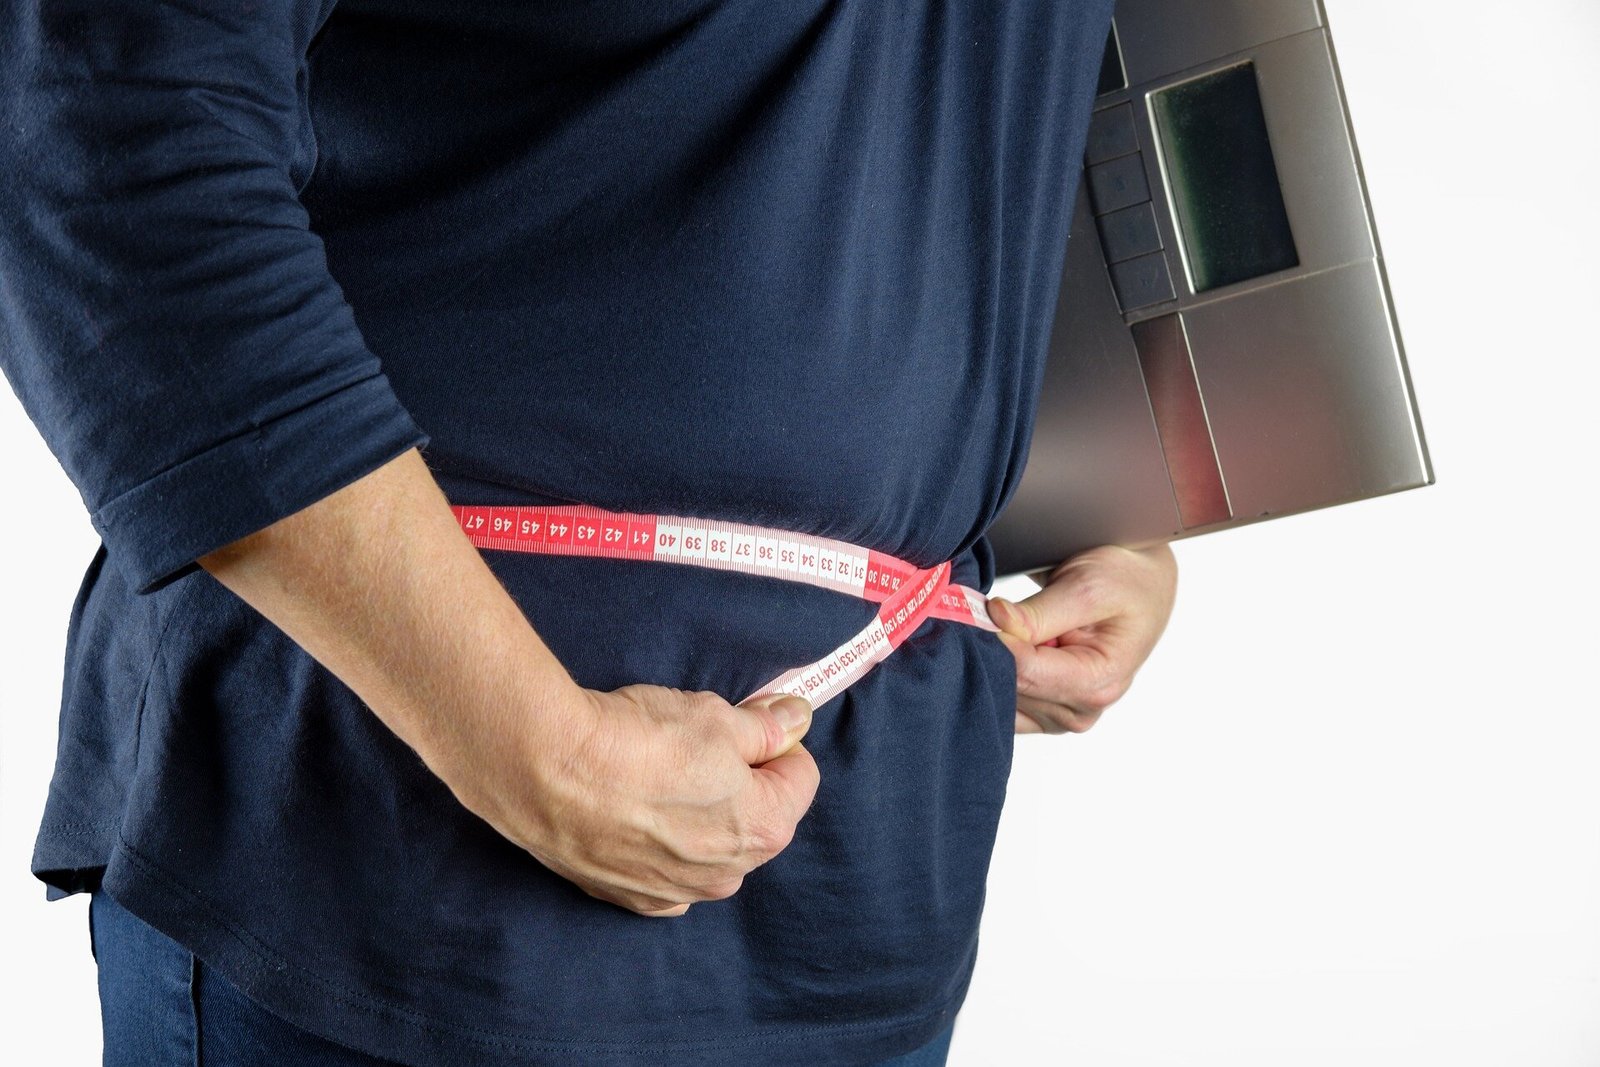 Should we ditch BMI and use the body roundness index instead